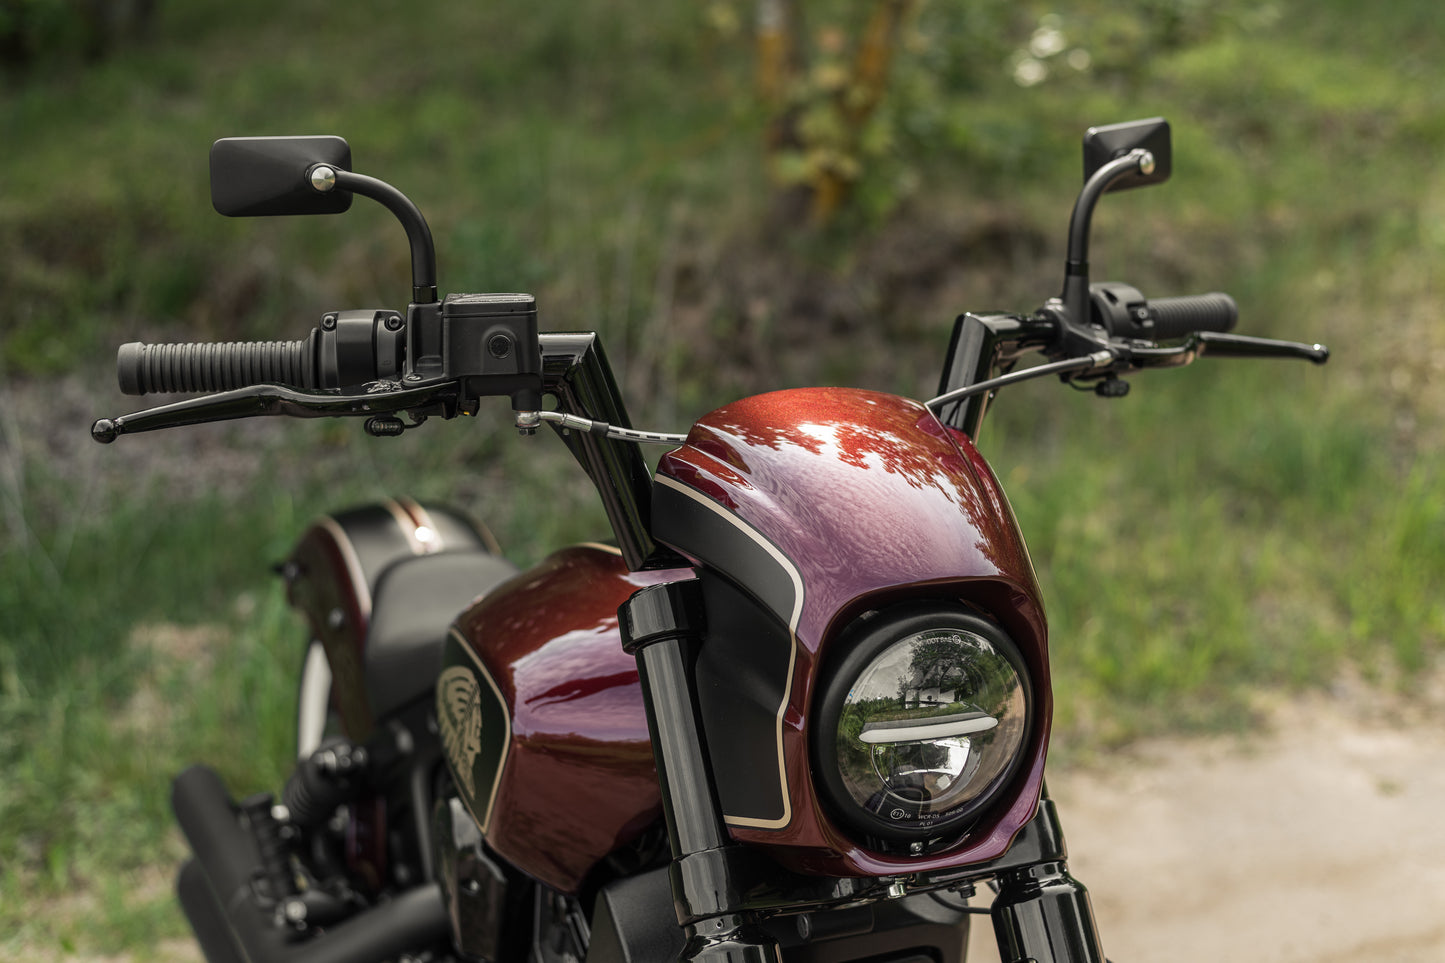 Harley Davidson motorcycle with Killer Custom "Tomahawk" series mini ape handlebar from the front with a green blurred background